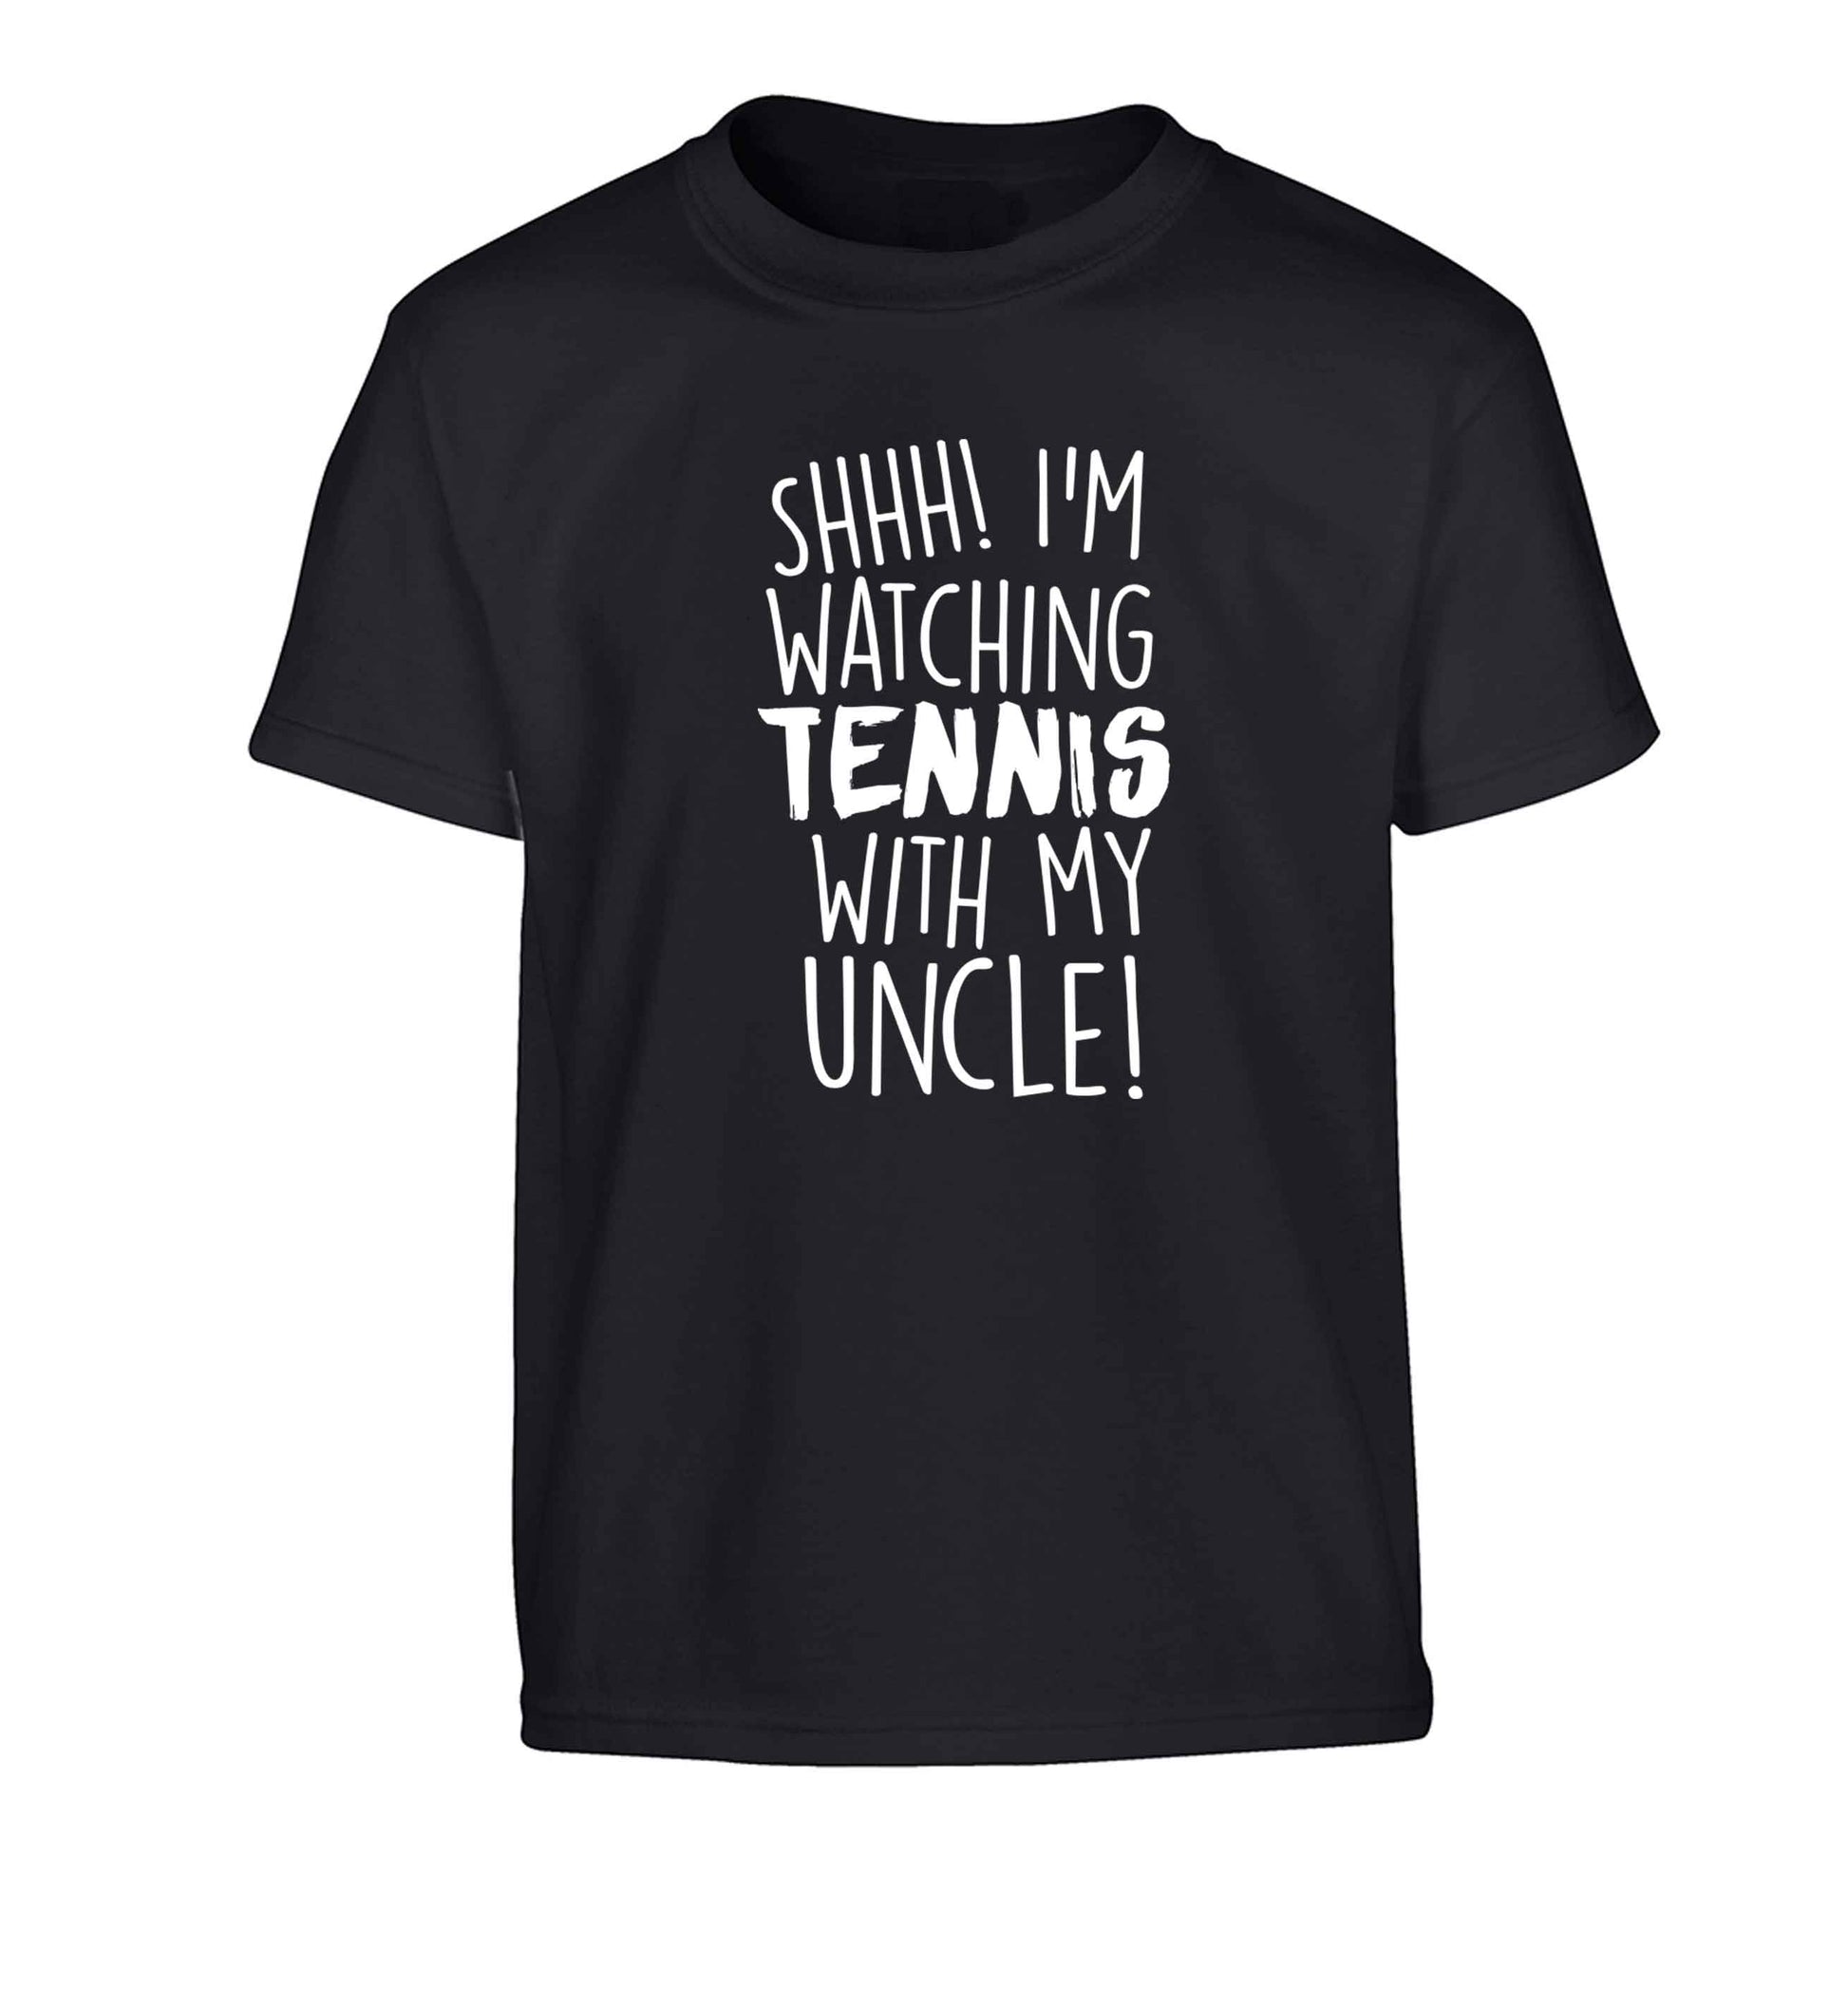 Shh! I'm watching tennis with my uncle! Children's black Tshirt 12-13 Years